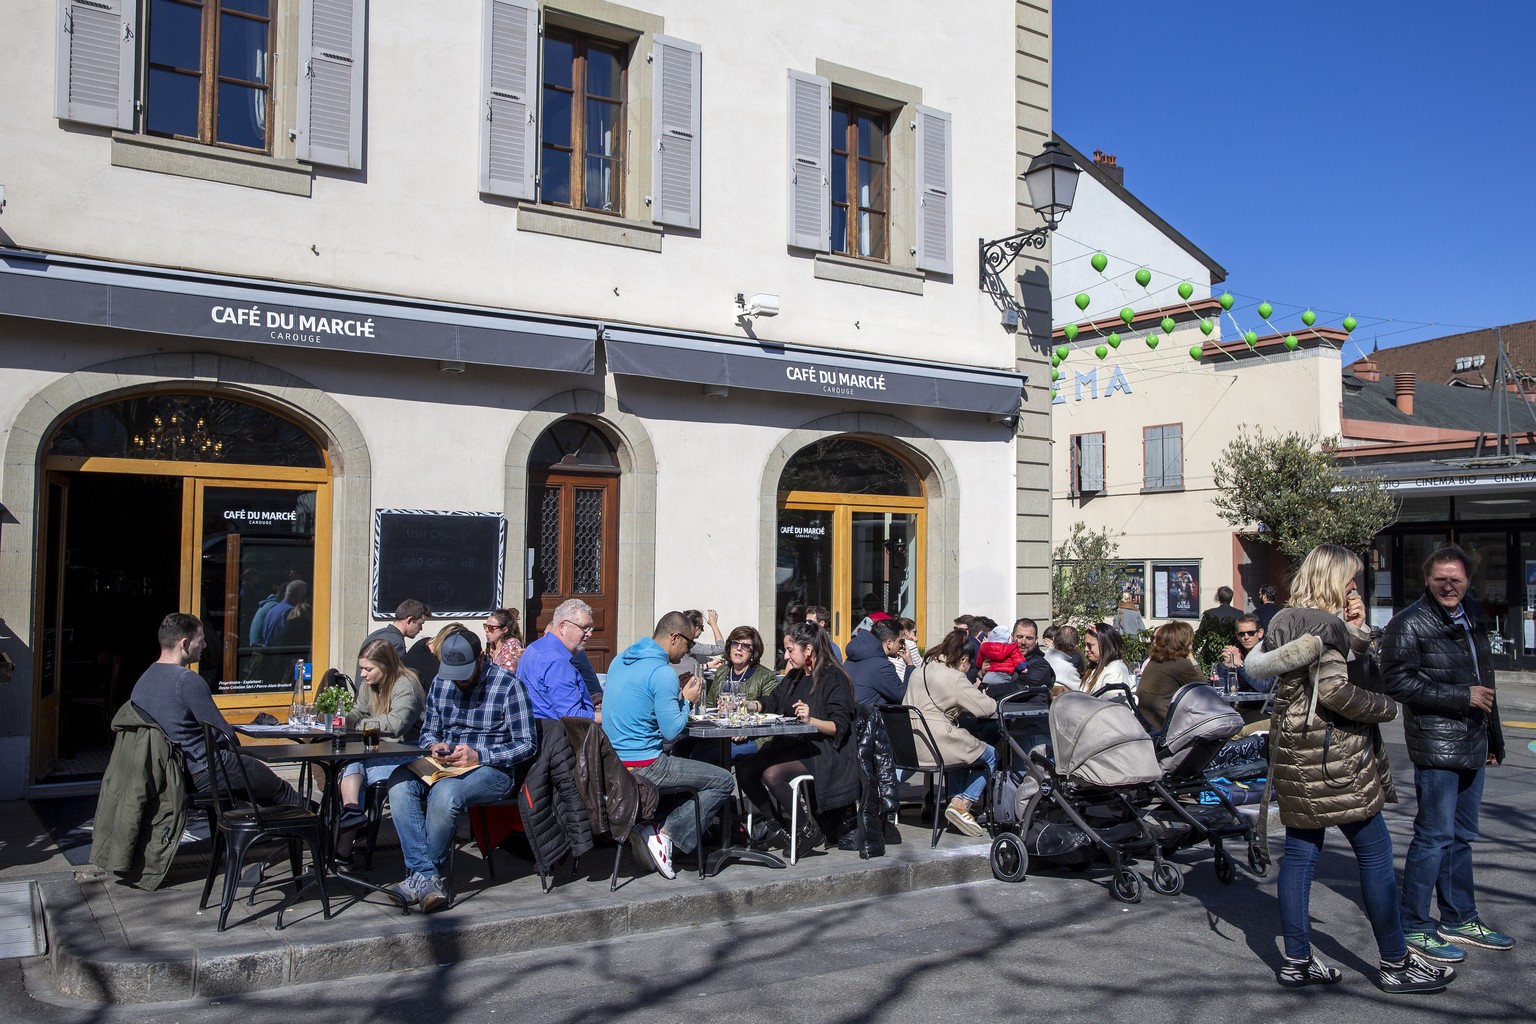 epa08294691 Customers gather on terace of the Cafe du Marche with social distance as part of measures to contain the spread of coronavirus COVID-19, in Carouge near Geneva, Switzerland, 14 March 2020. ...